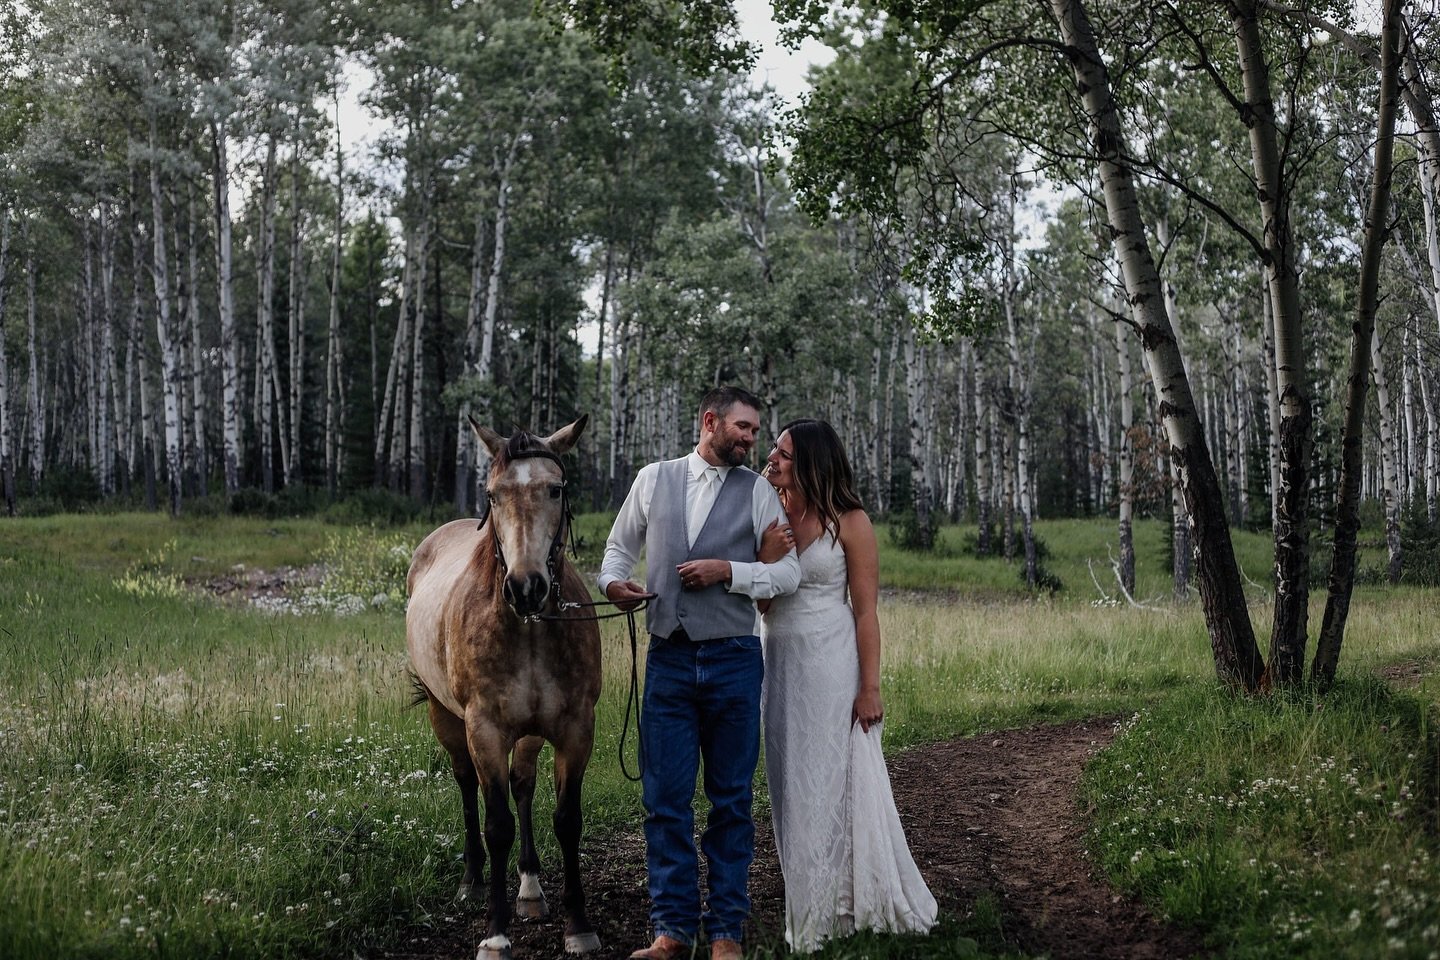 👇 Outdoor summer Activities for your Elopement 👇

Here&rsquo;s a list of some of my fav activities to include for your summer outdoor elopement! Adding an activity that you both enjoy doing together makes the day more unique &amp; personable 

- PO